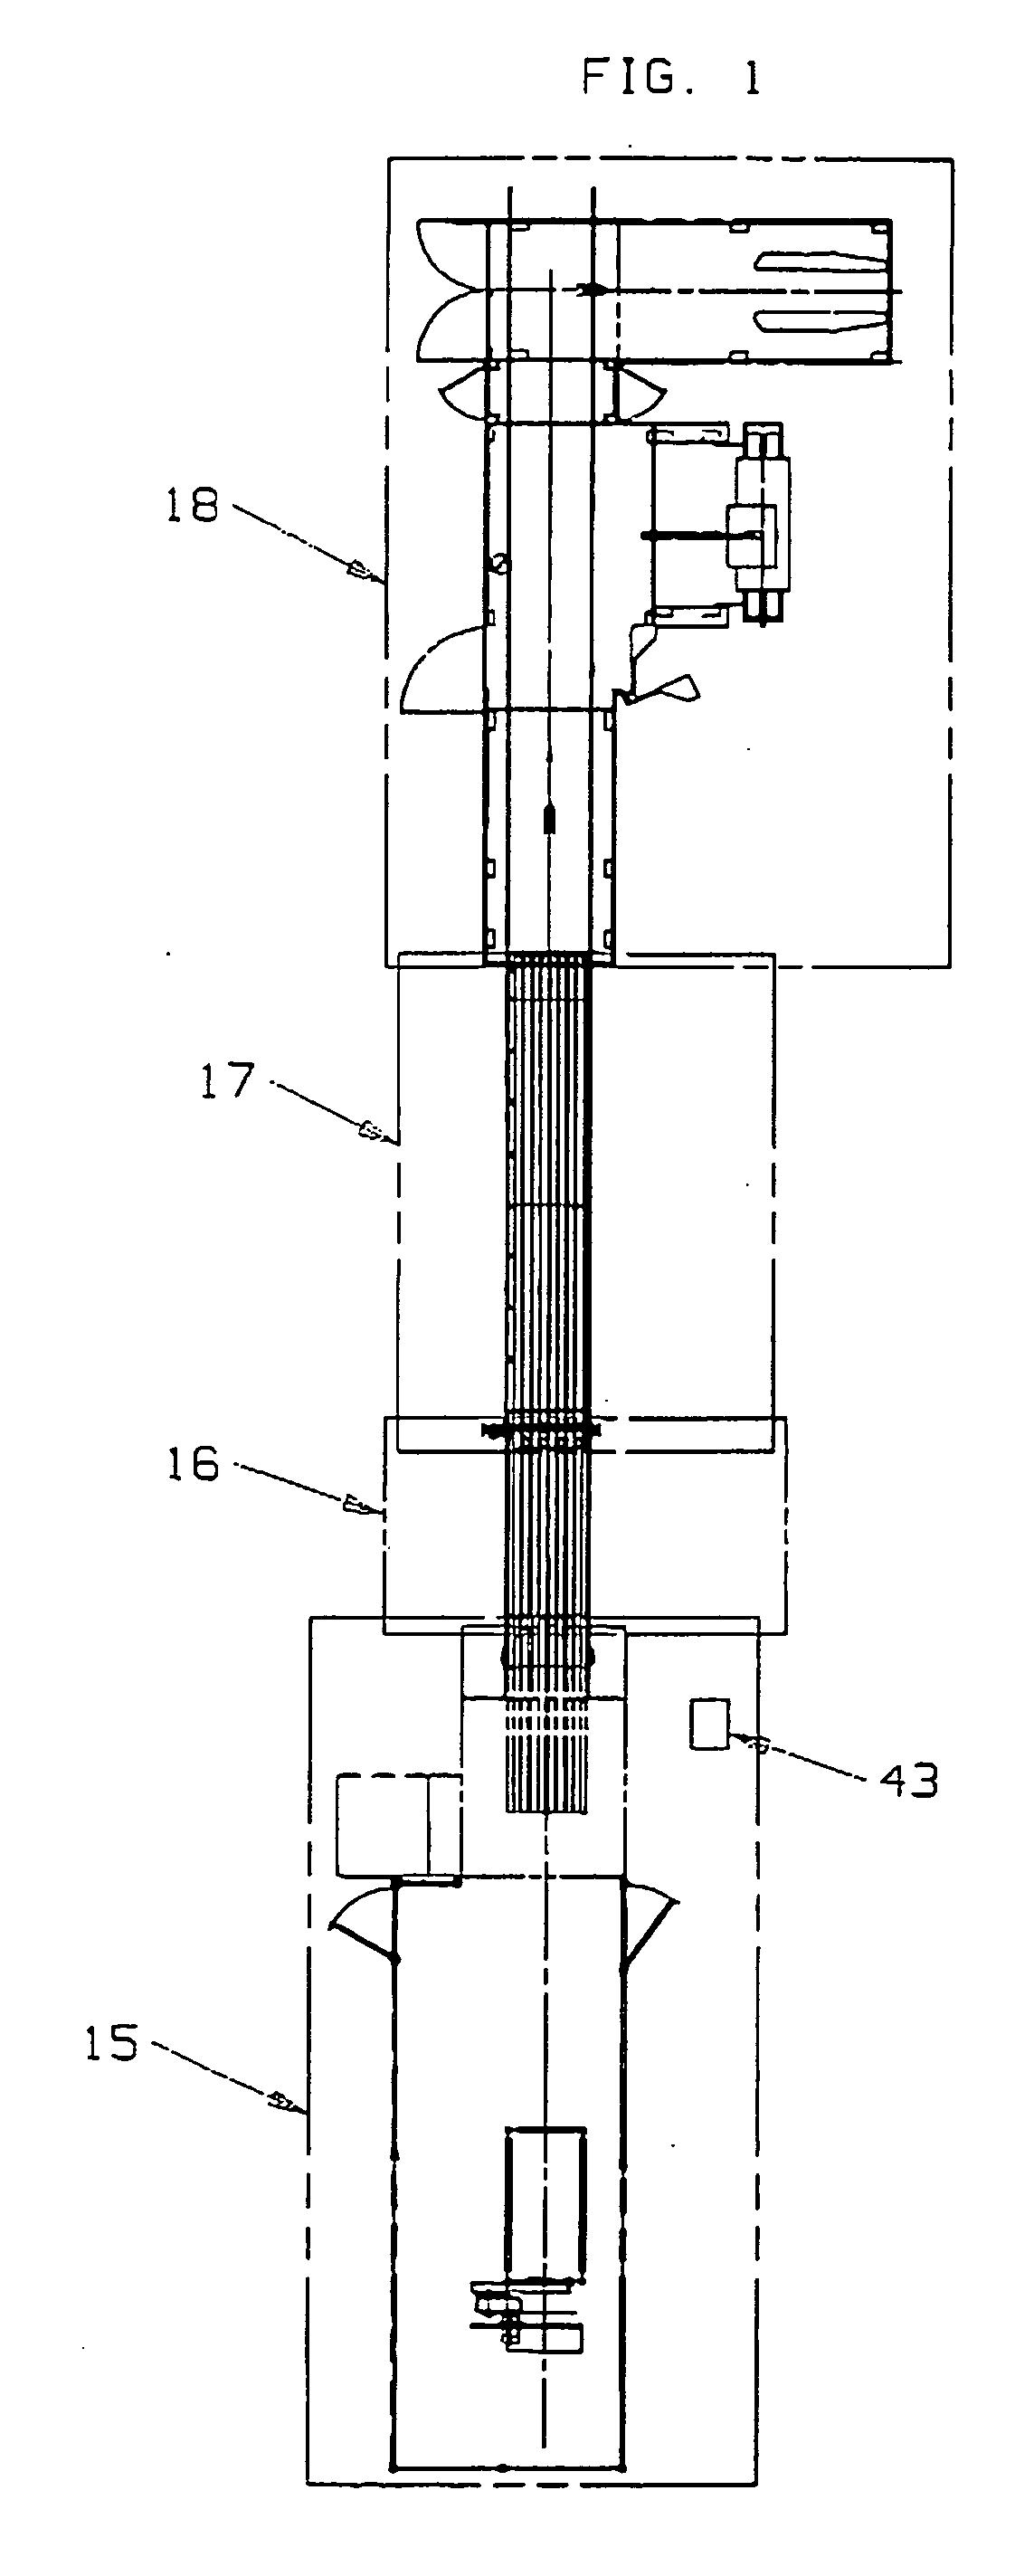 Apparatus for feeding rolls of cut products to a wrapper